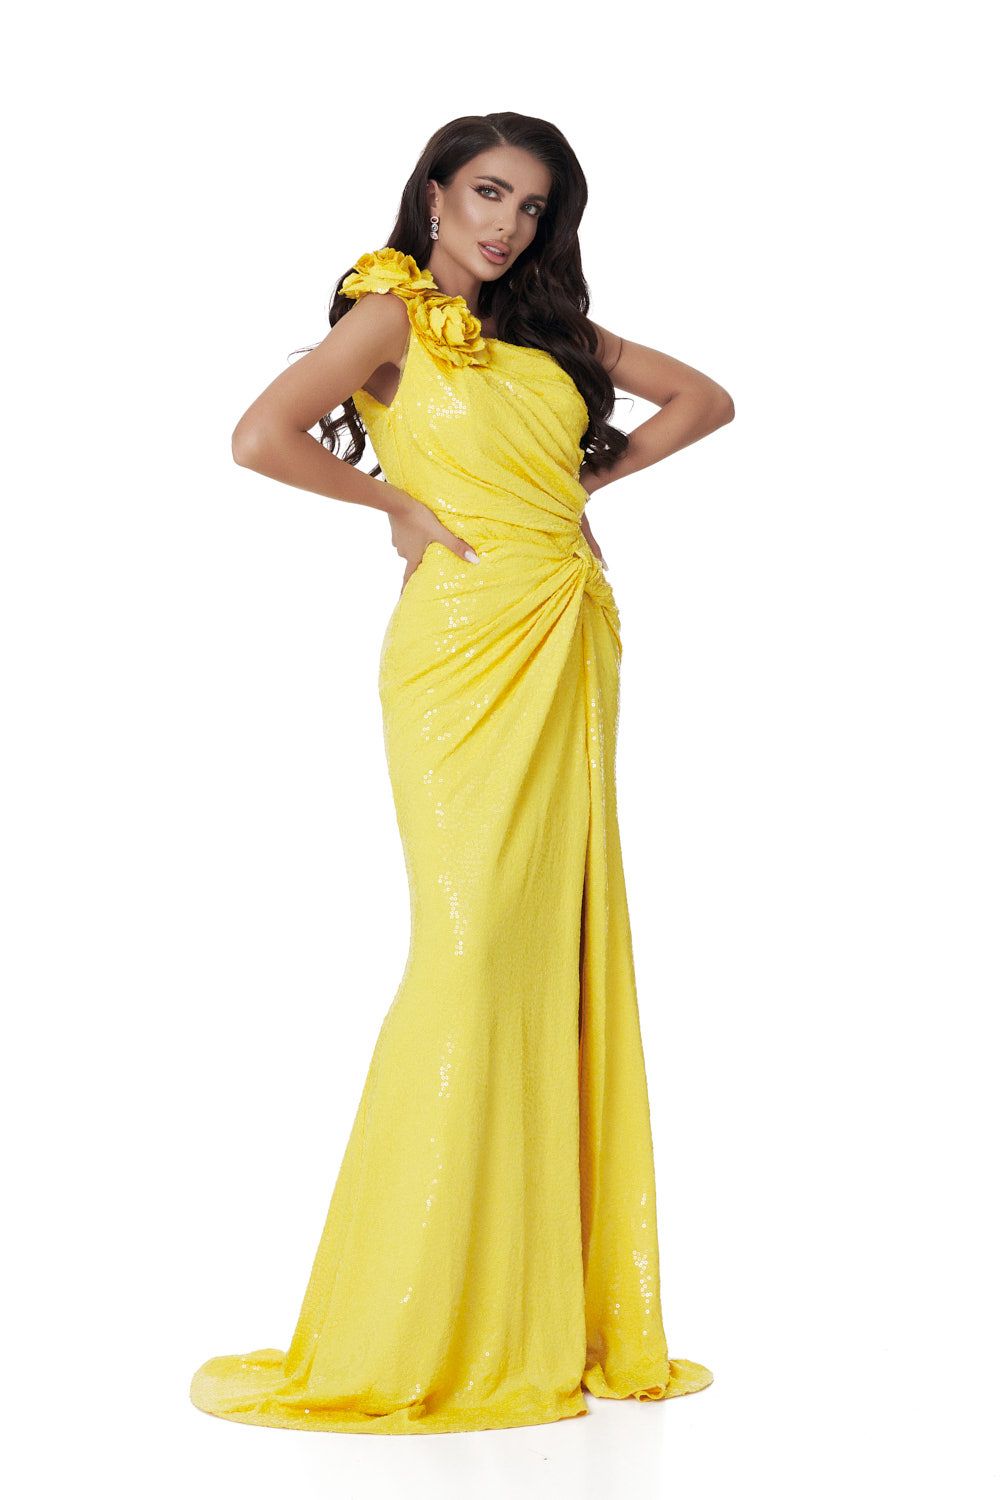 Long yellow sequin dress for women by Manrique Bogas